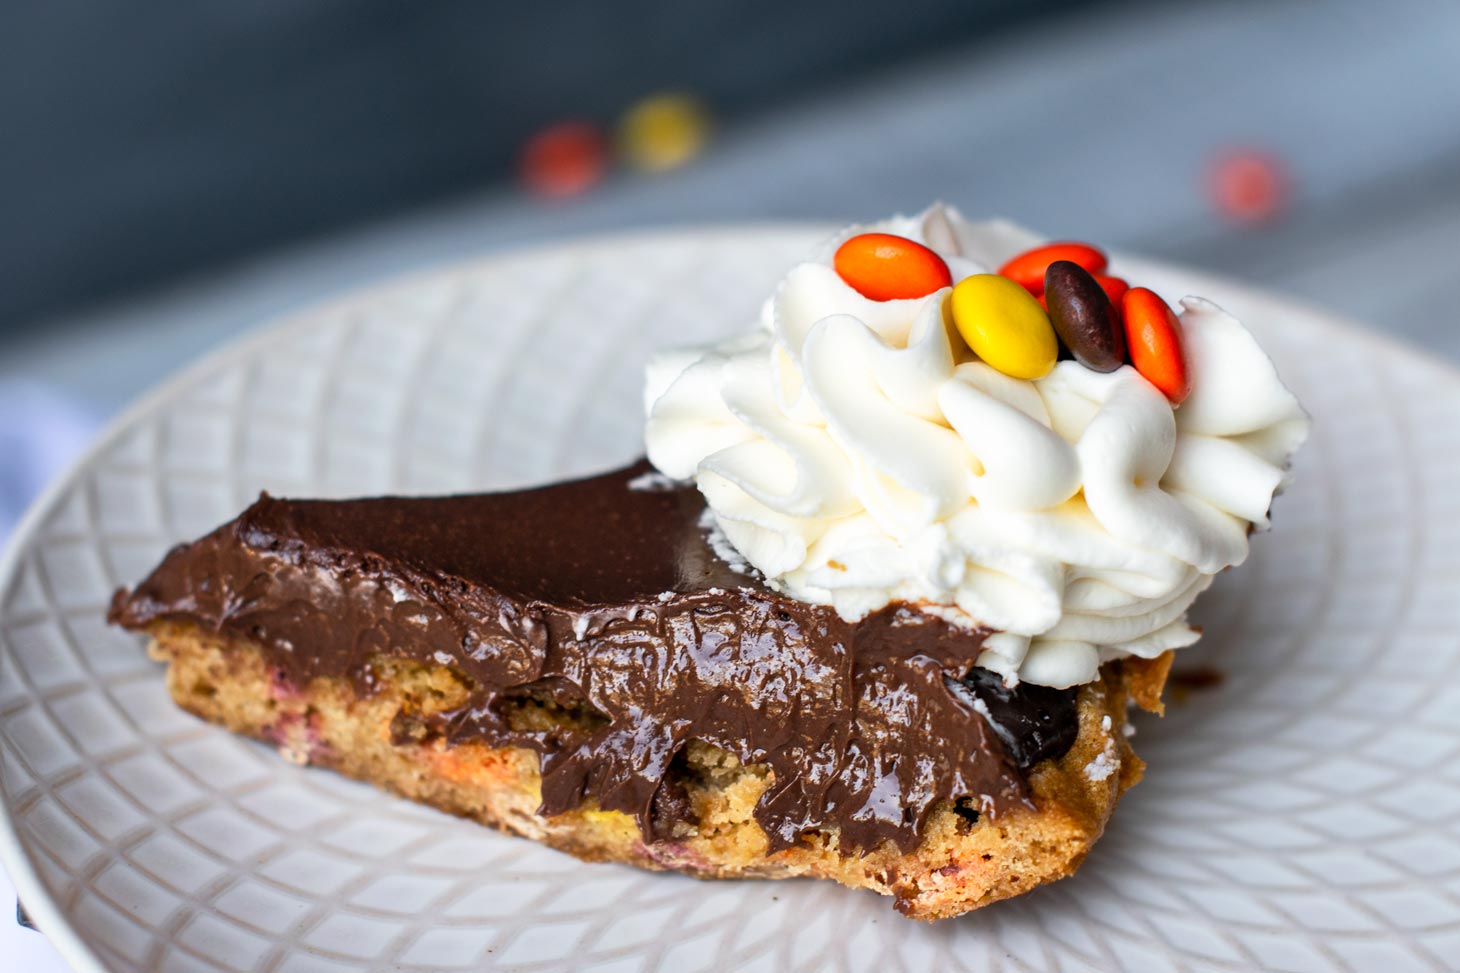 Reese's Pieces peanut butter chocolate pie